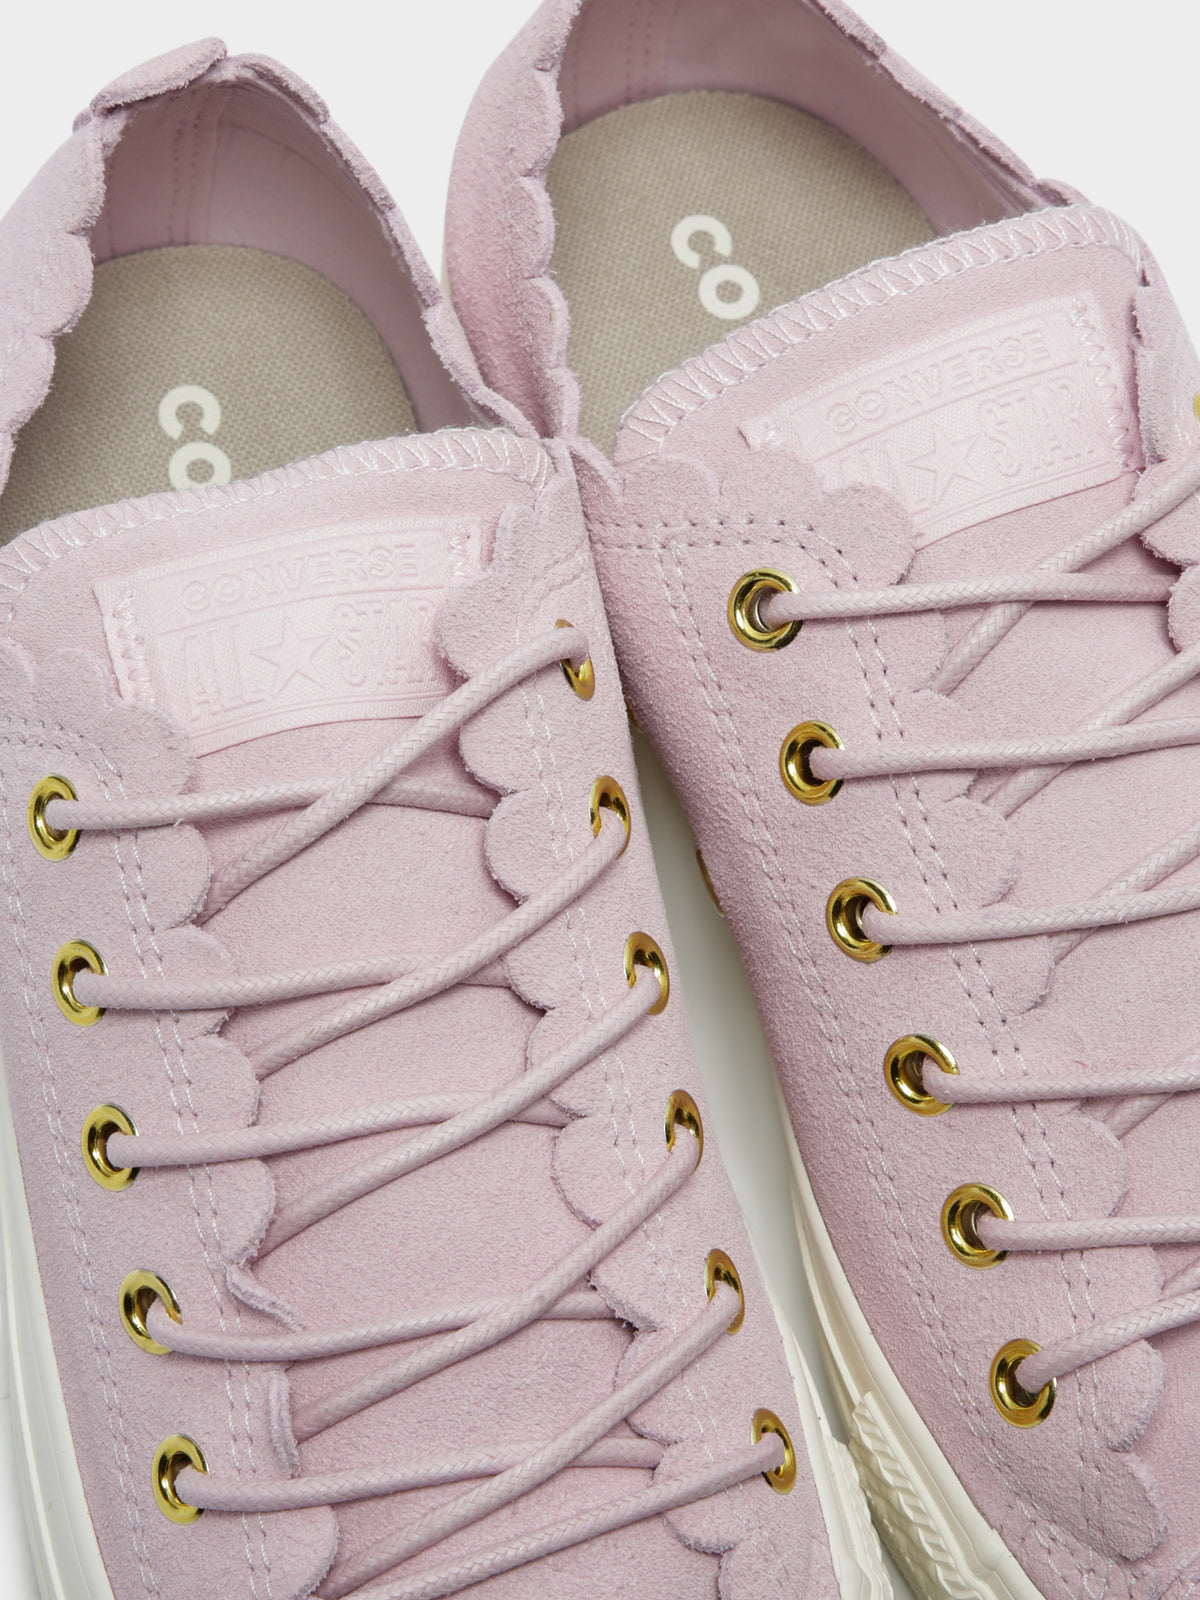 Womens Chuck Taylor All Stars Frilly Thrills in Pink Foam